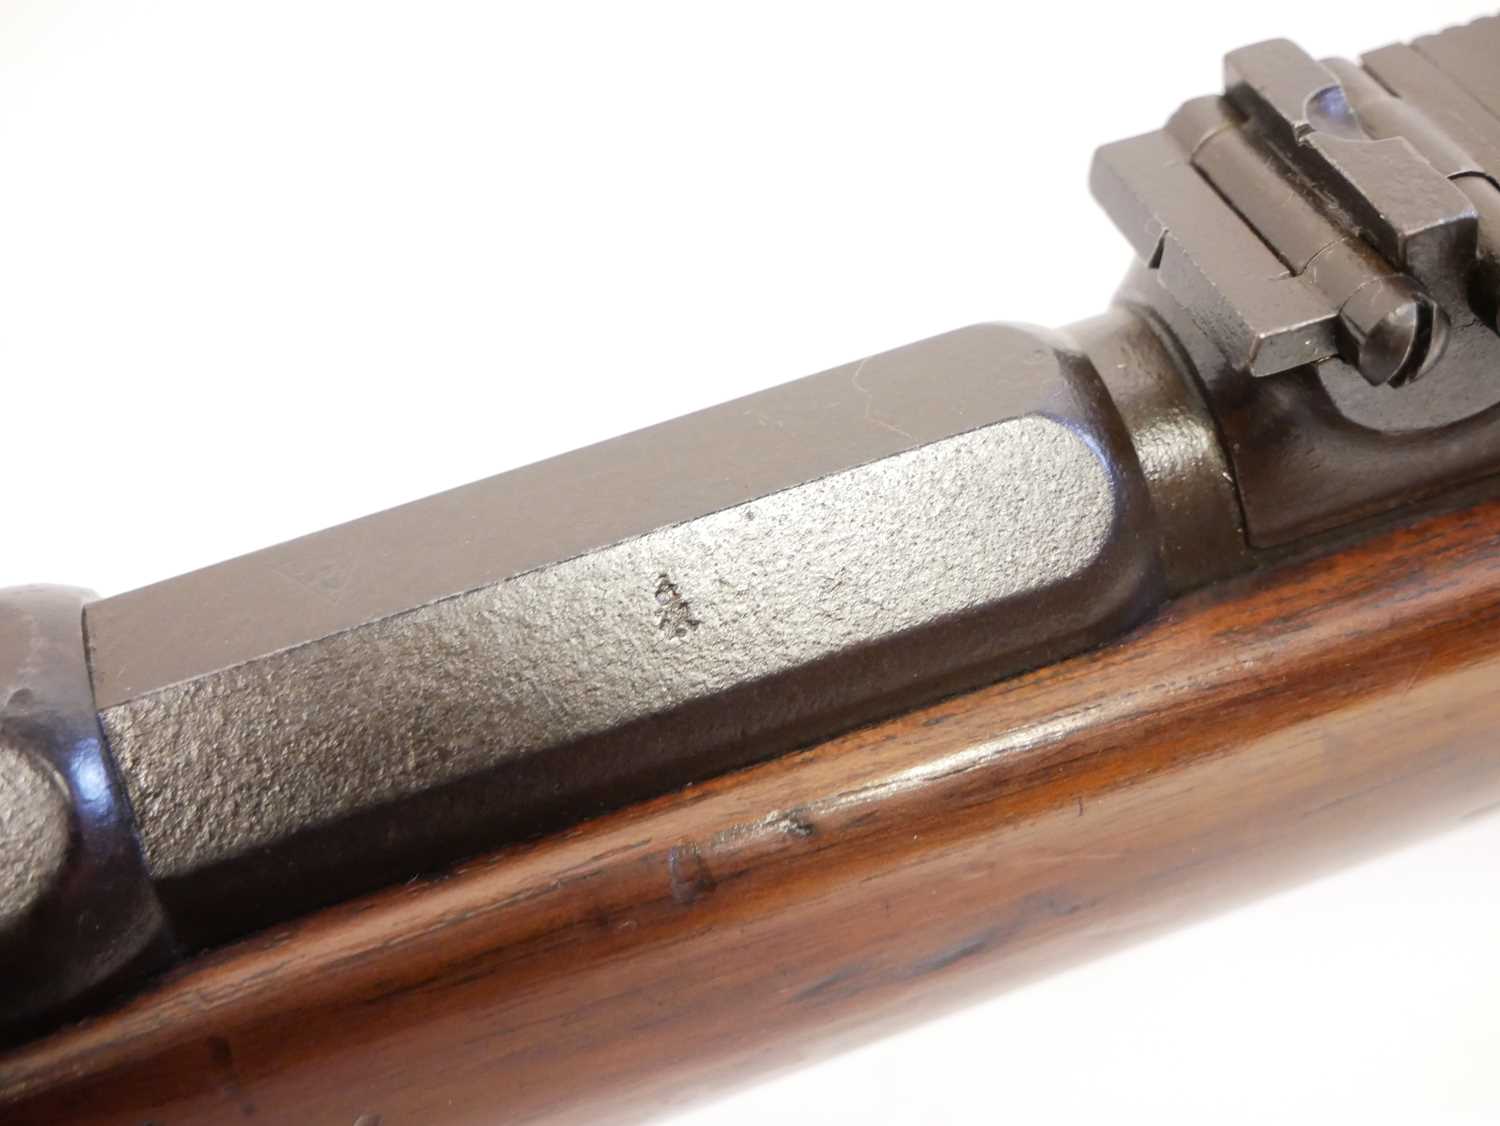 Rare British manufactured Mauser 1871 pattern 11x60R bolt action rifle, serial number 8177D, - Image 10 of 21